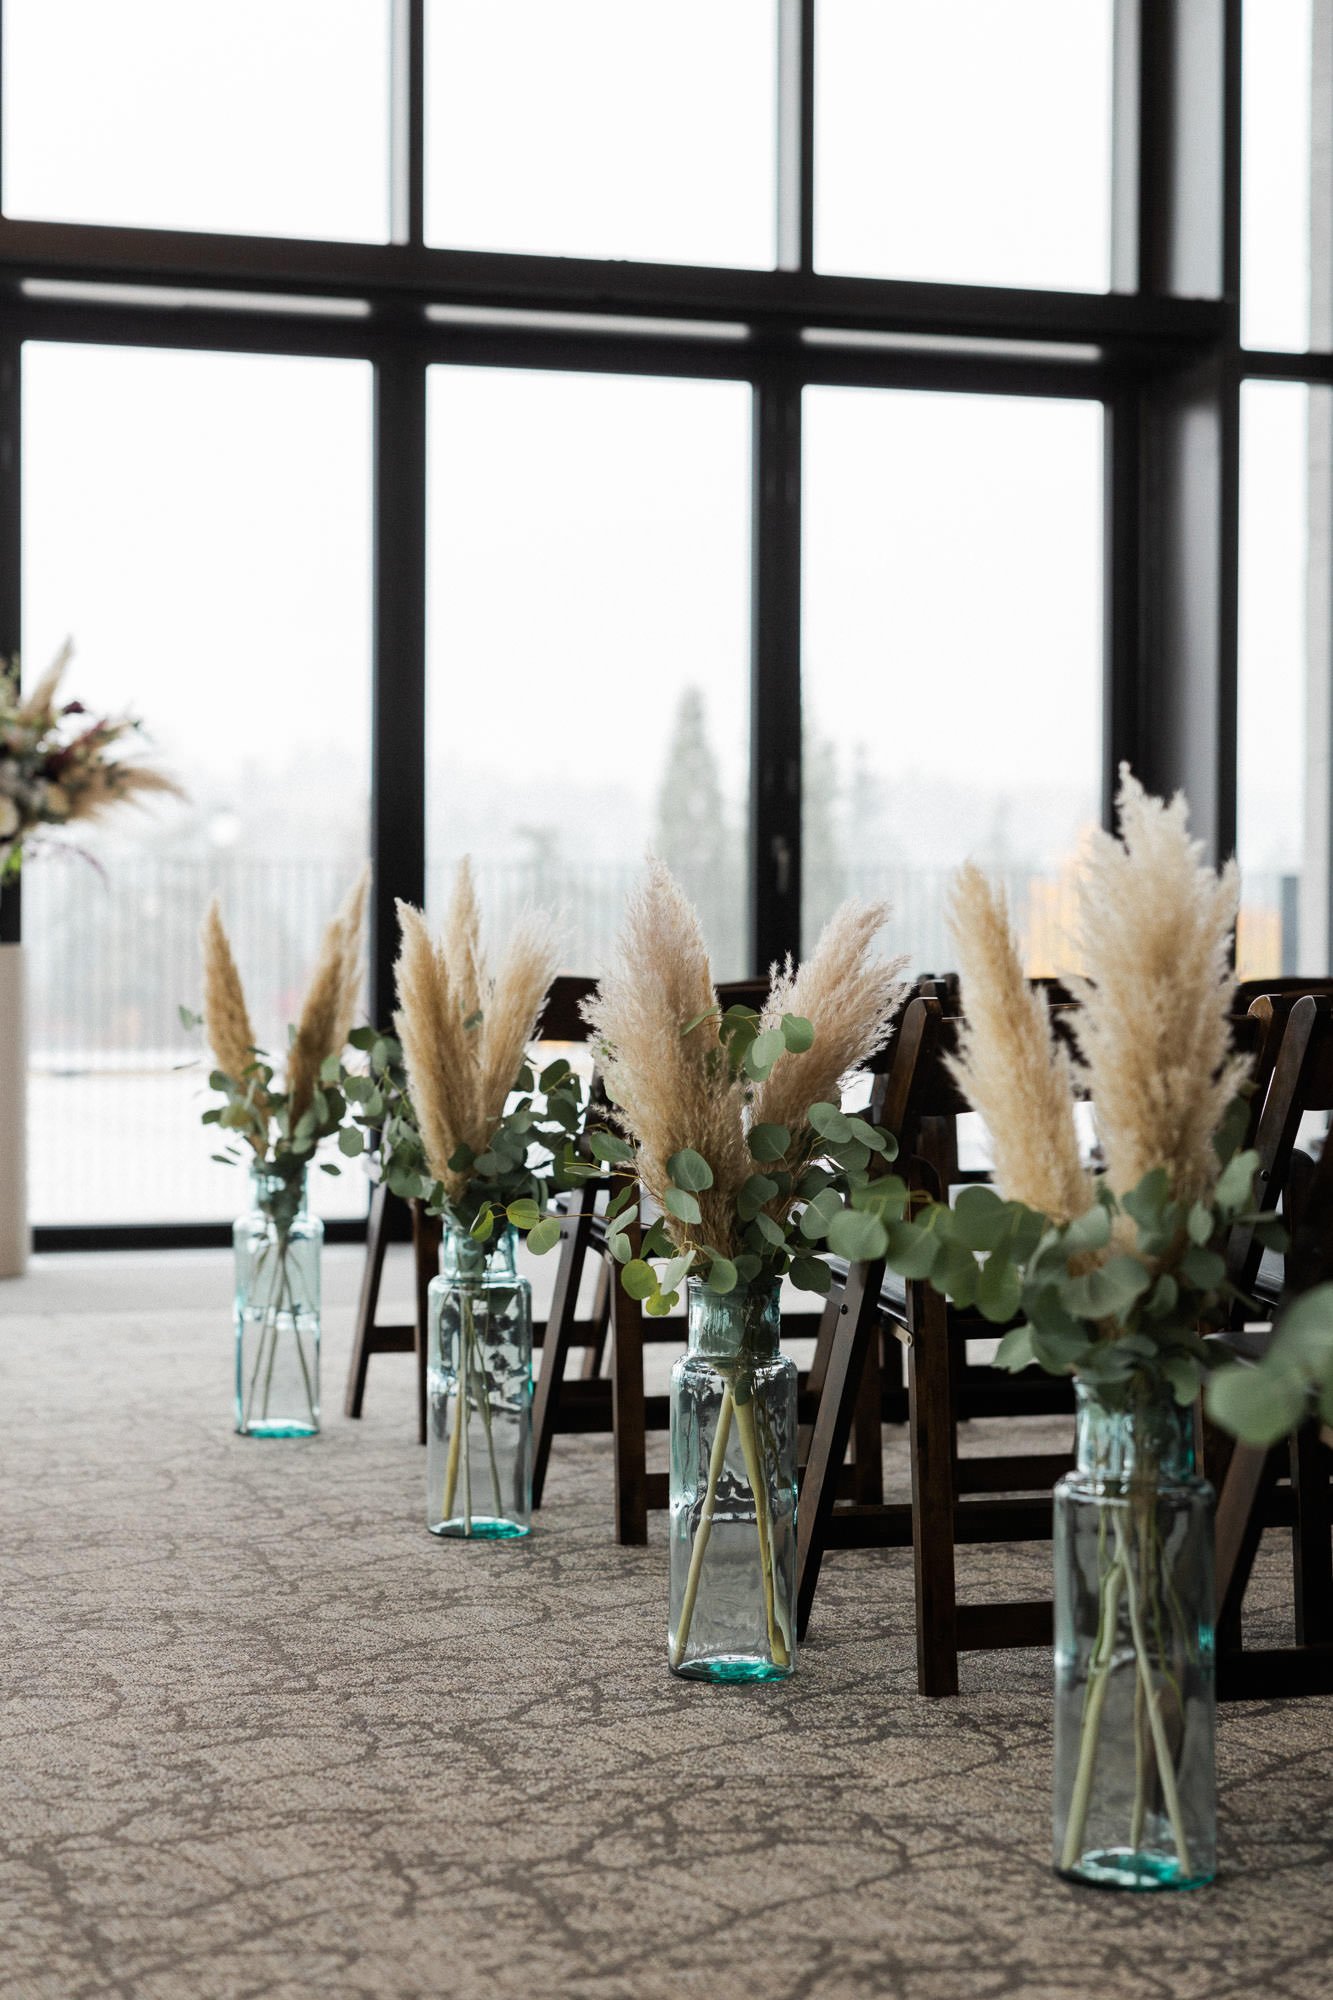 pampas grass in vases lining aisle at ironlight wedding venue in lake oswego, oregon